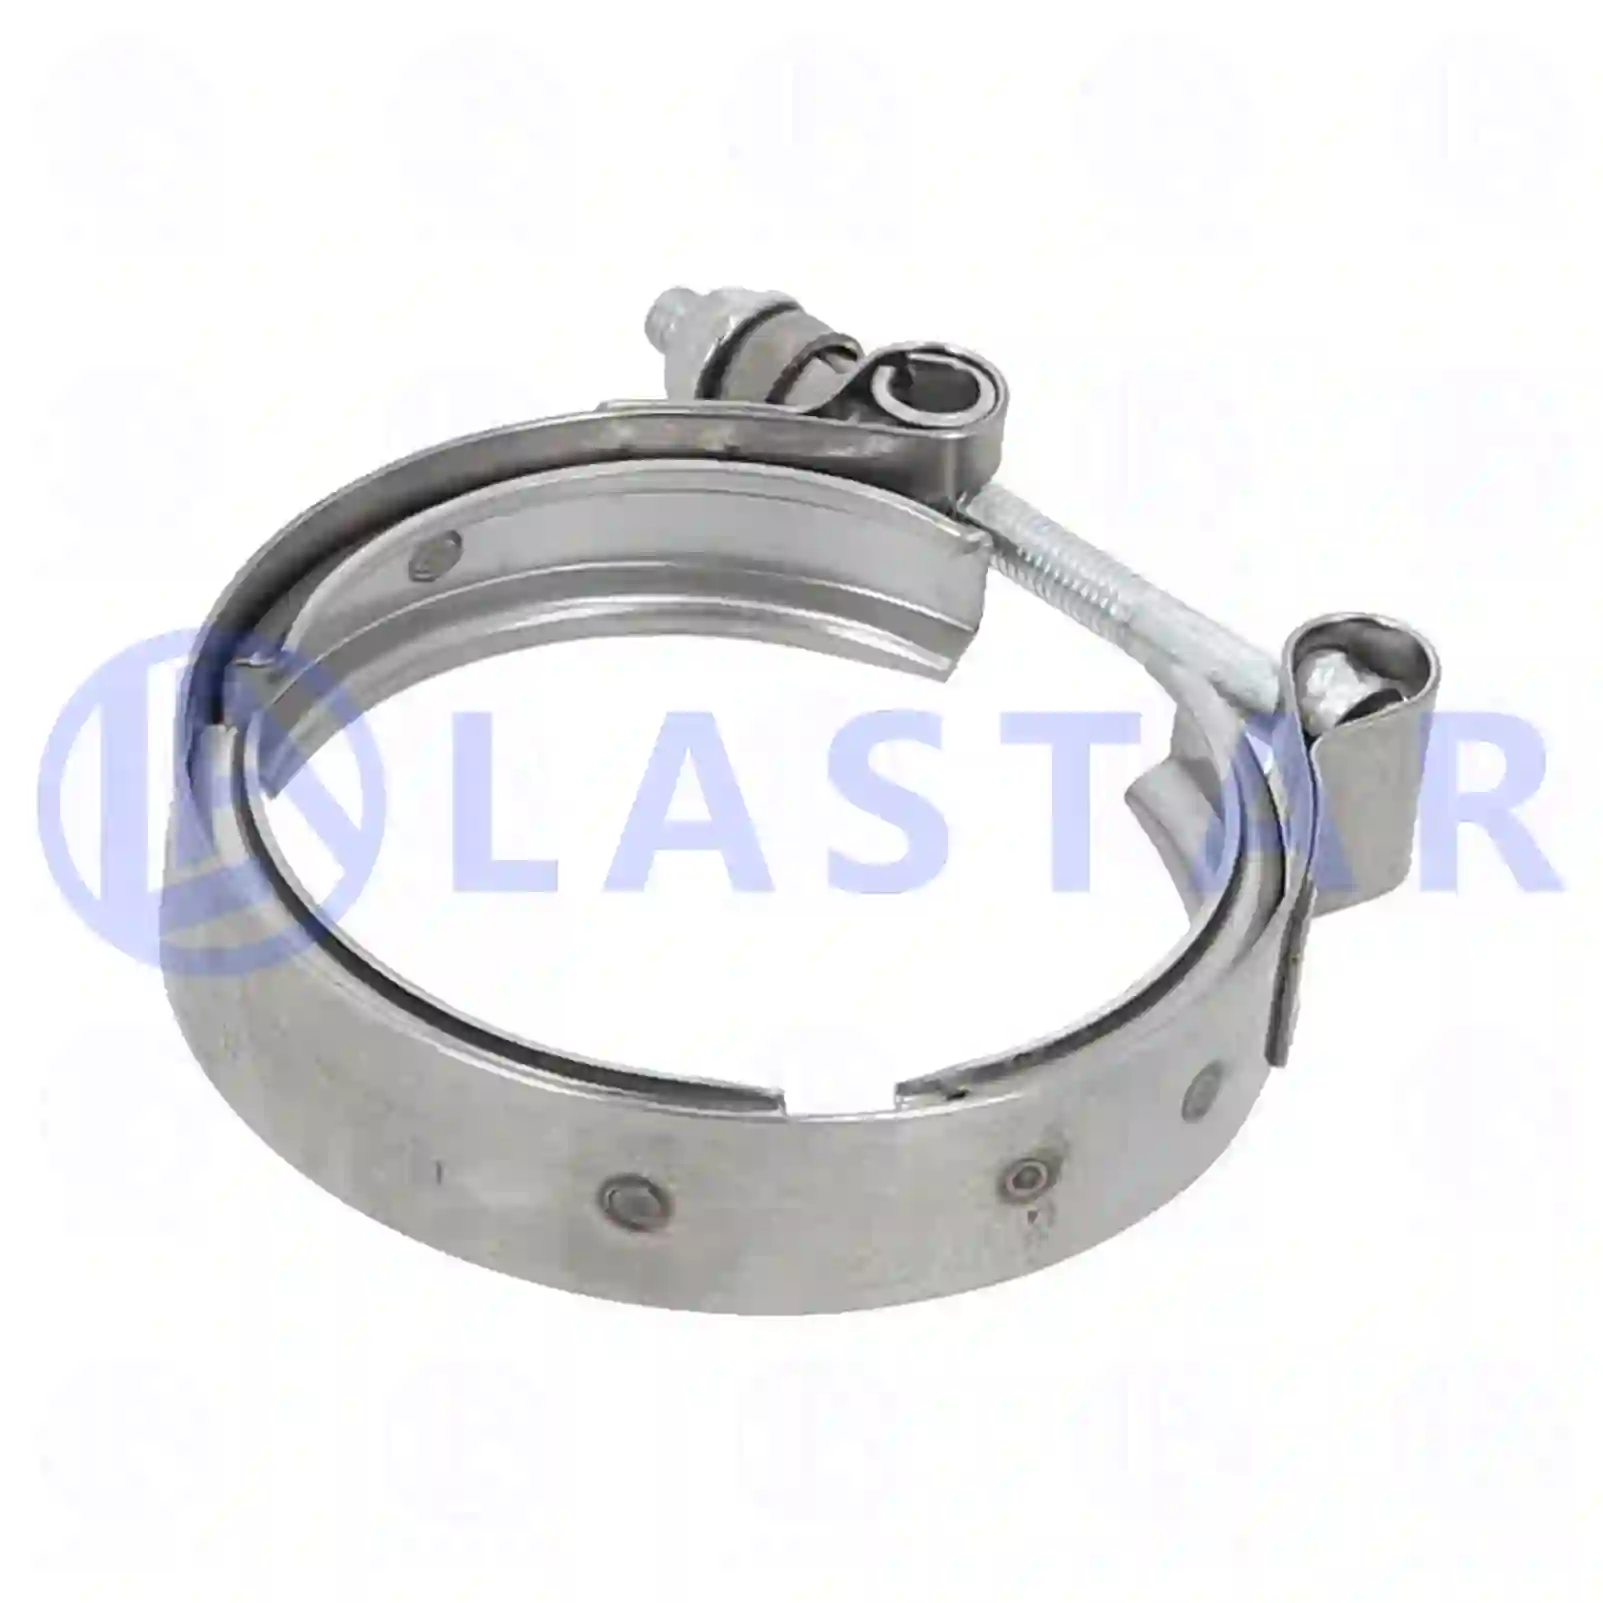 Tensioning clamp, 77702379, 04800661, 4800661, 51974450033 ||  77702379 Lastar Spare Part | Truck Spare Parts, Auotomotive Spare Parts Tensioning clamp, 77702379, 04800661, 4800661, 51974450033 ||  77702379 Lastar Spare Part | Truck Spare Parts, Auotomotive Spare Parts